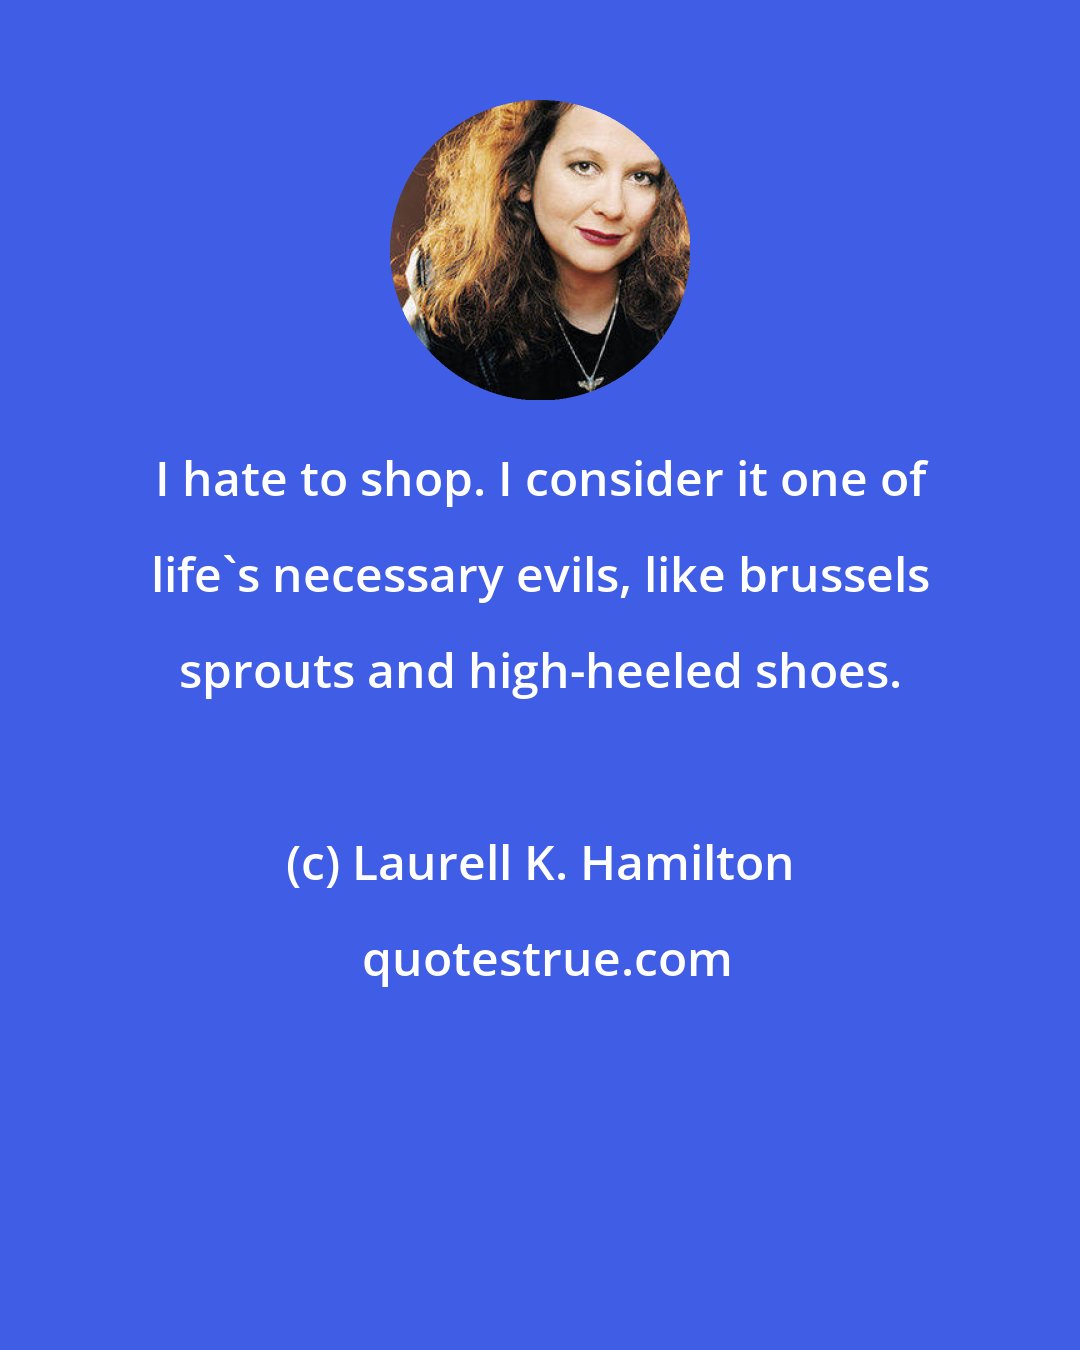 Laurell K. Hamilton: I hate to shop. I consider it one of life's necessary evils, like brussels sprouts and high-heeled shoes.